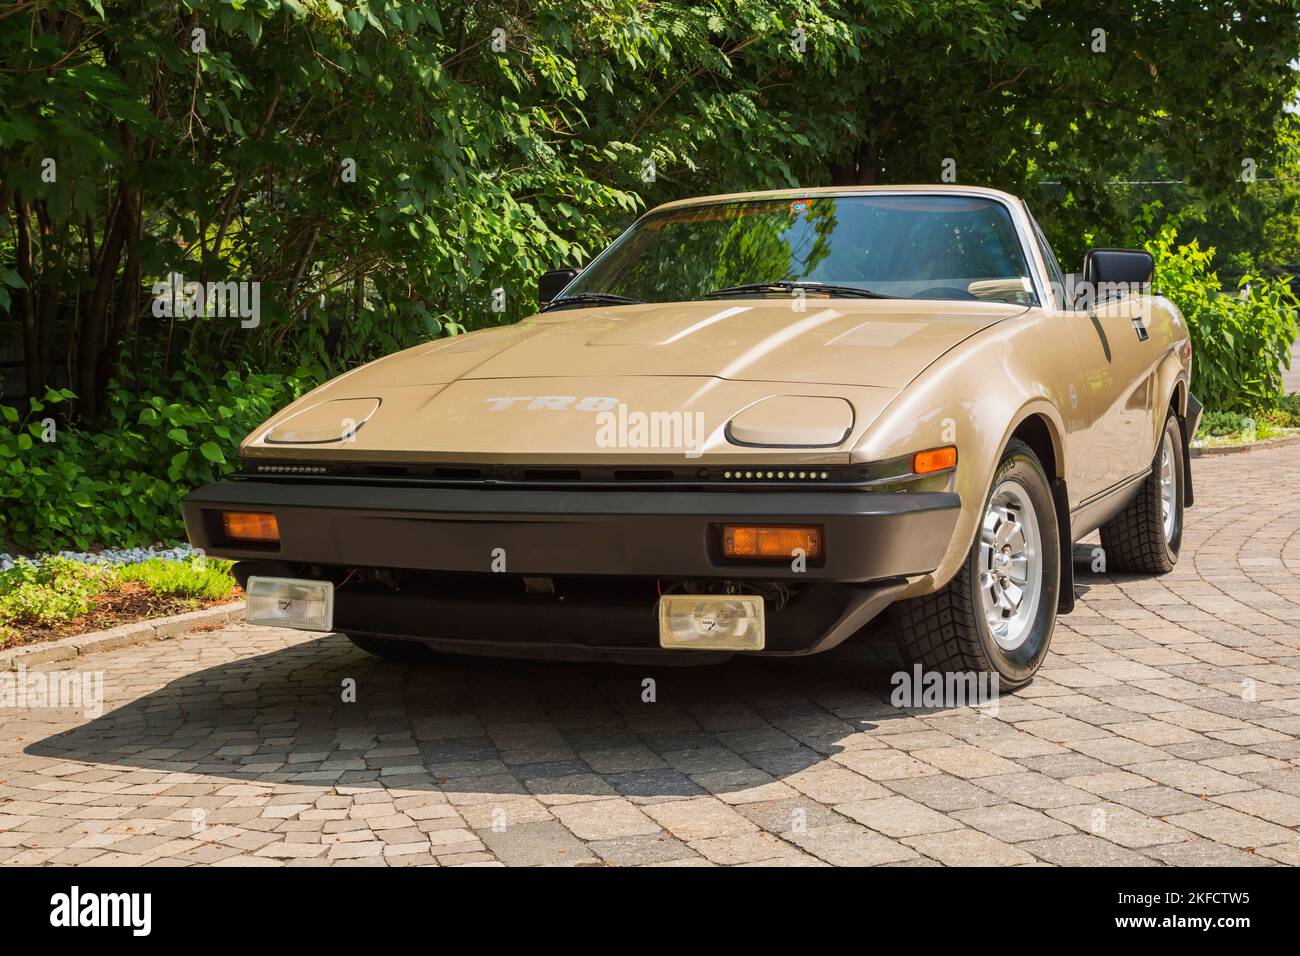 1980 midas-gold convertible Triumph TR8 parked in paving stone driveway. Stock Photo